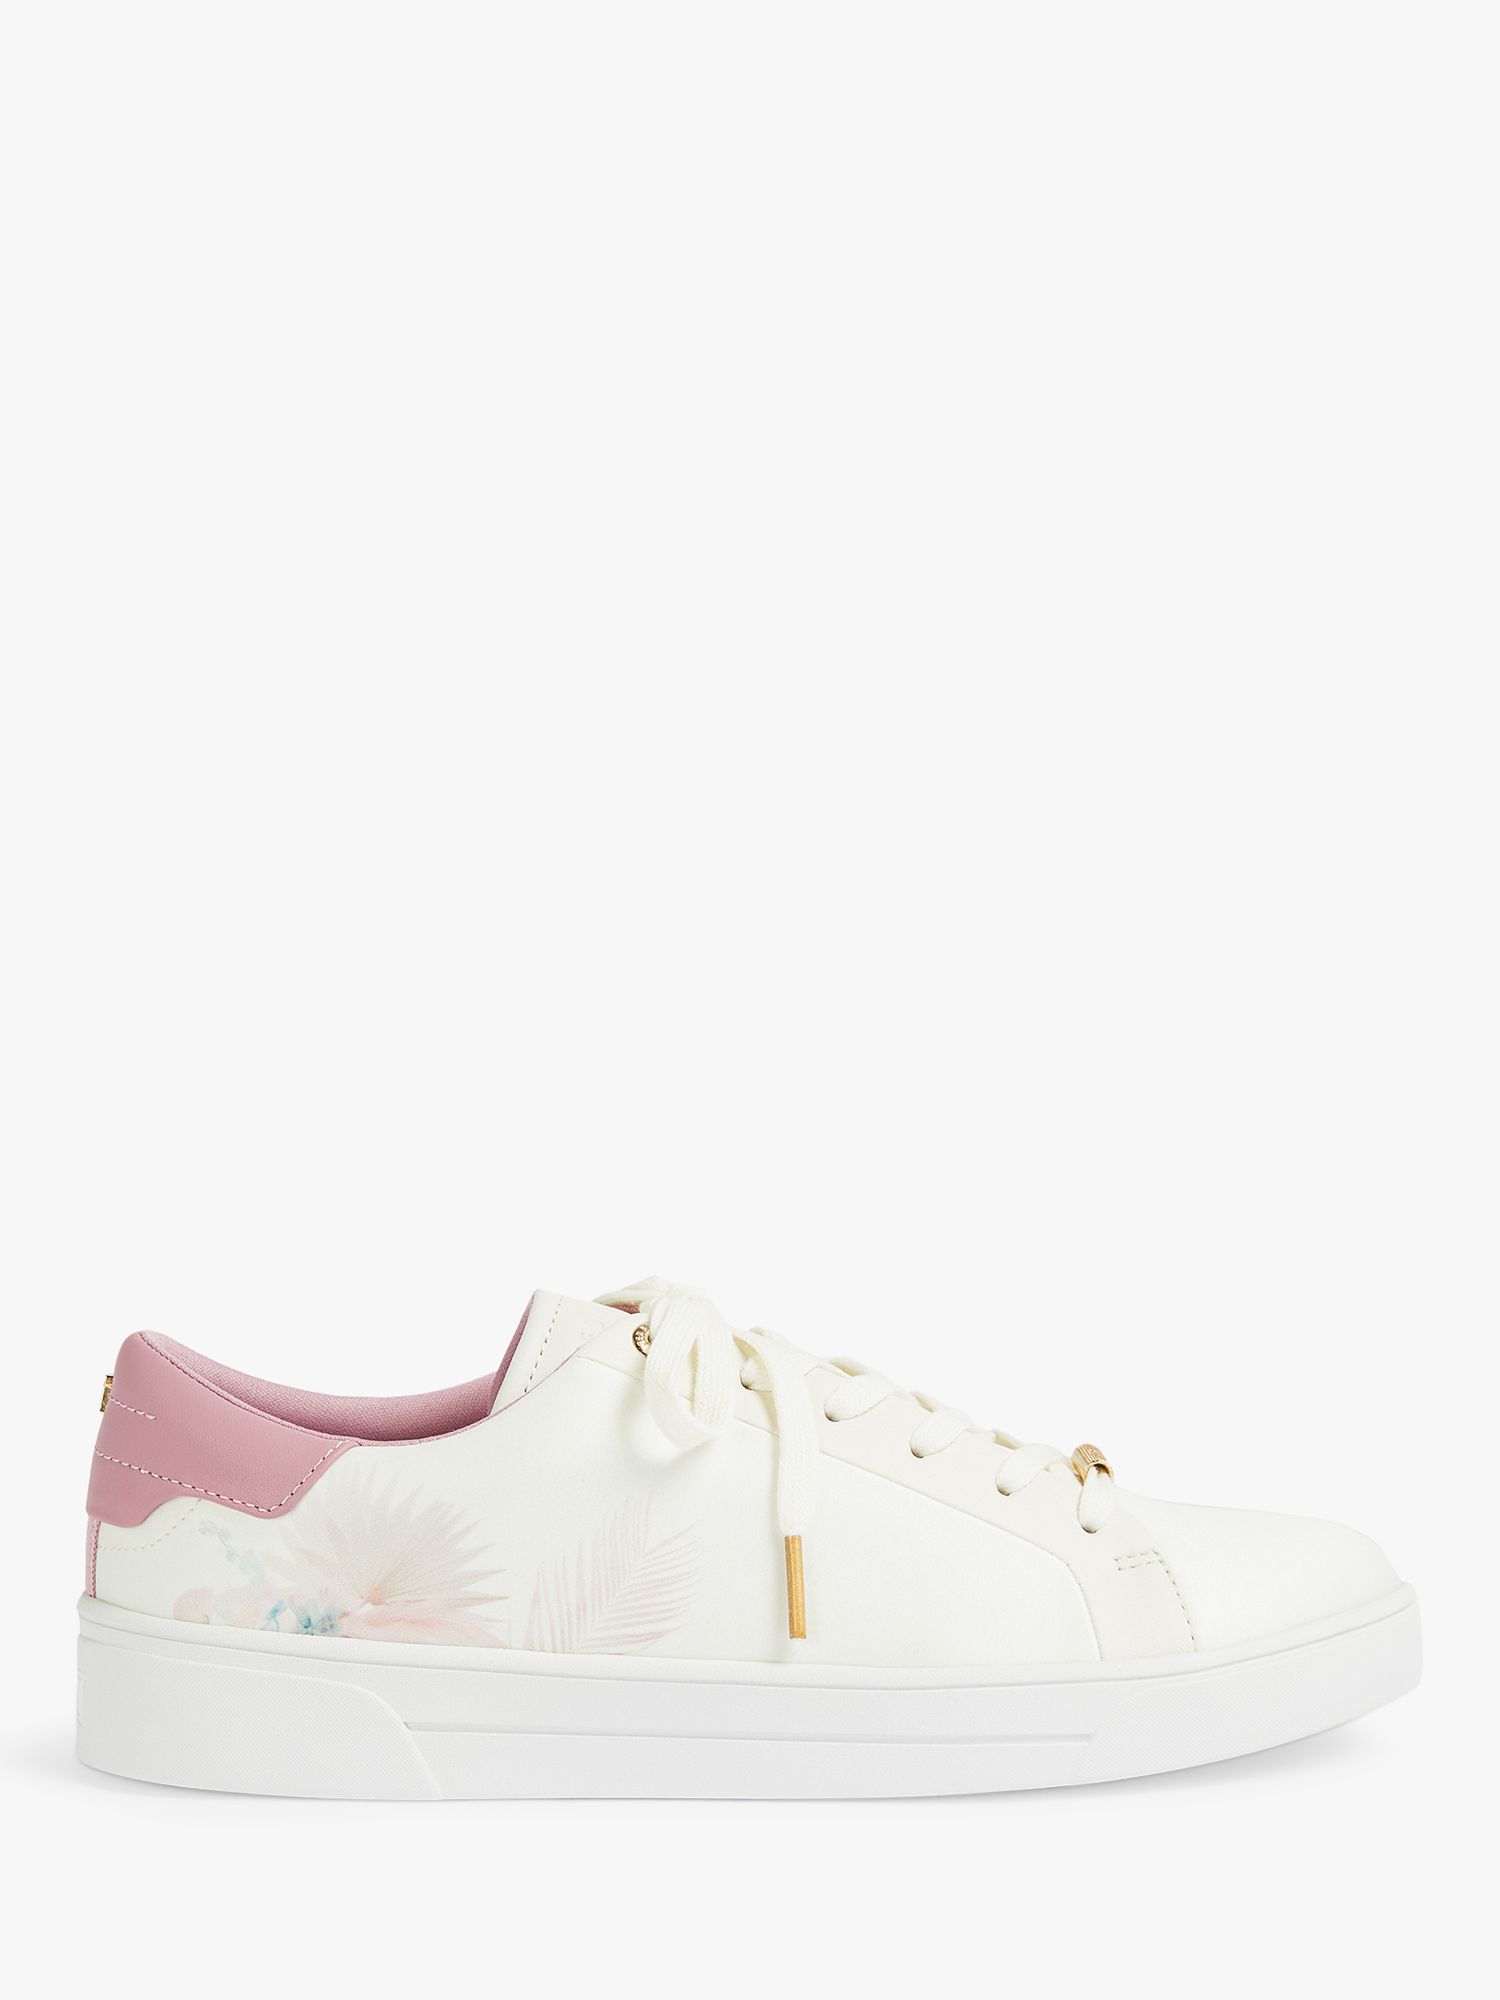 Ted Baker Delylas Serendipity Satin Trainers, White